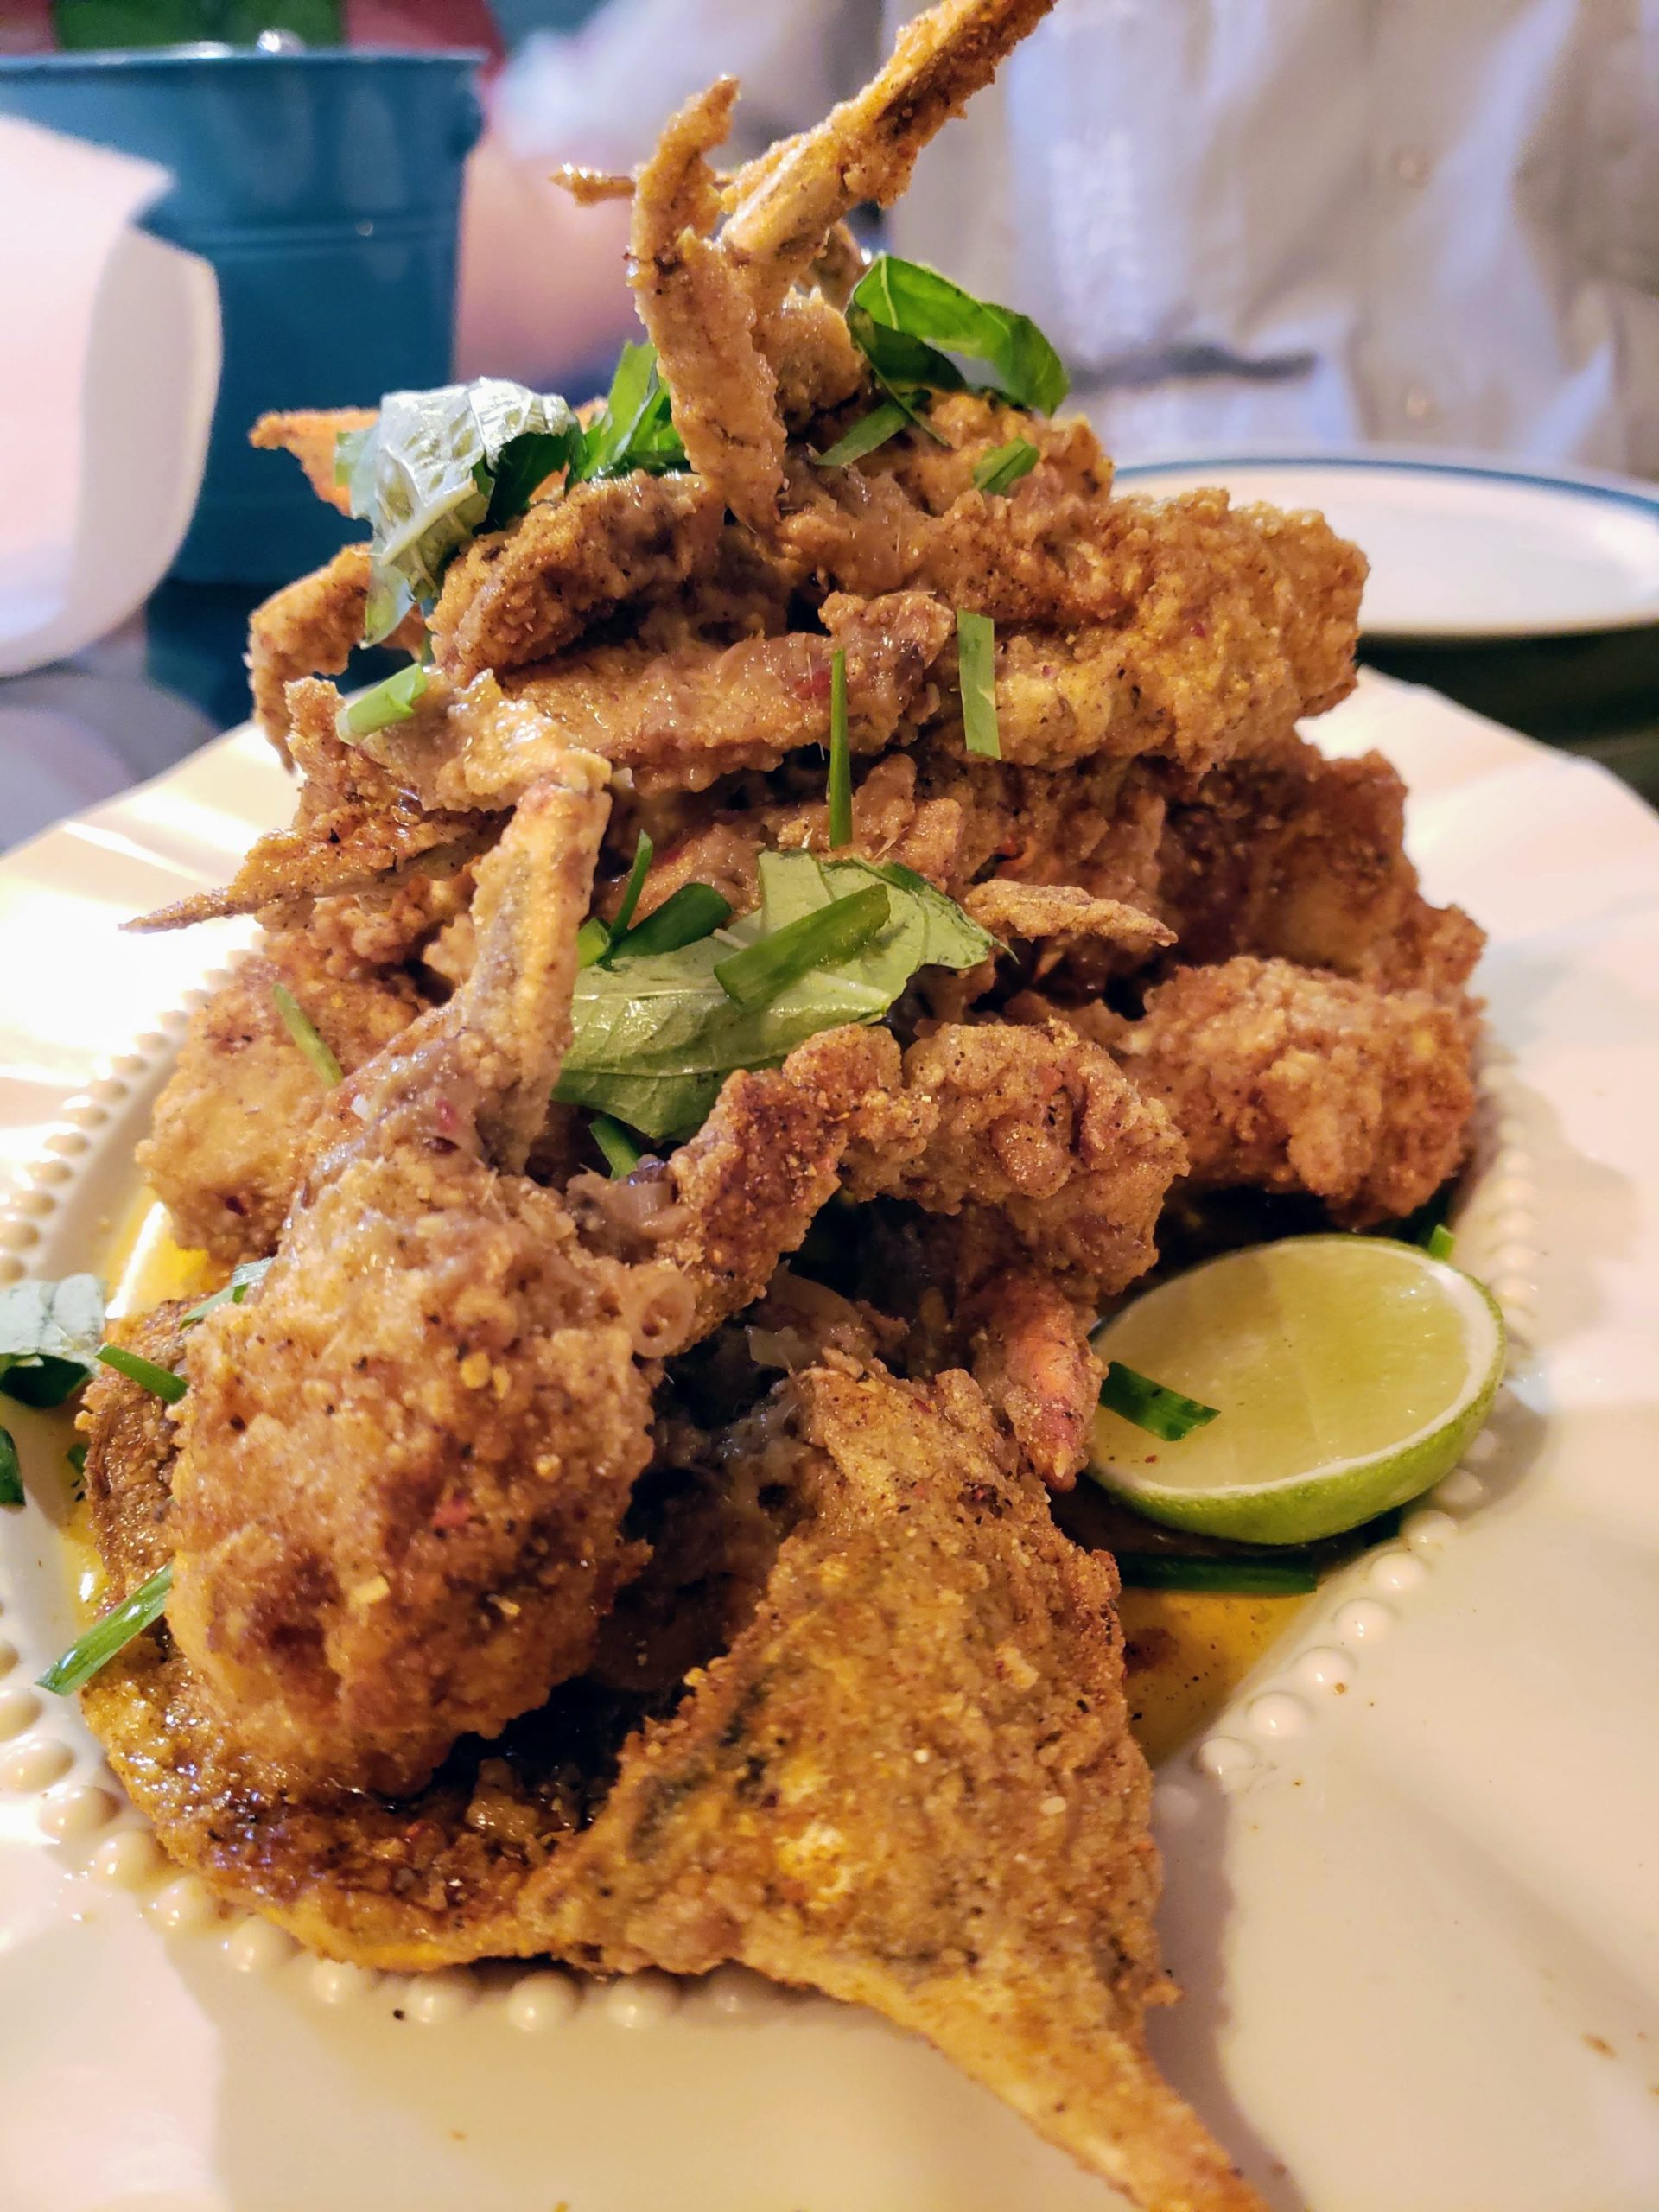 Marjie's Chili Butter Hard Crabs - boiled Louisiana blue crabs, dredged
 in batter, fried, doused in a sharp, rich chili butter and given a fall of torn herbs and chives - are otherworldly. (Photo by Lorin Gaudin, Very Local New Orleans)